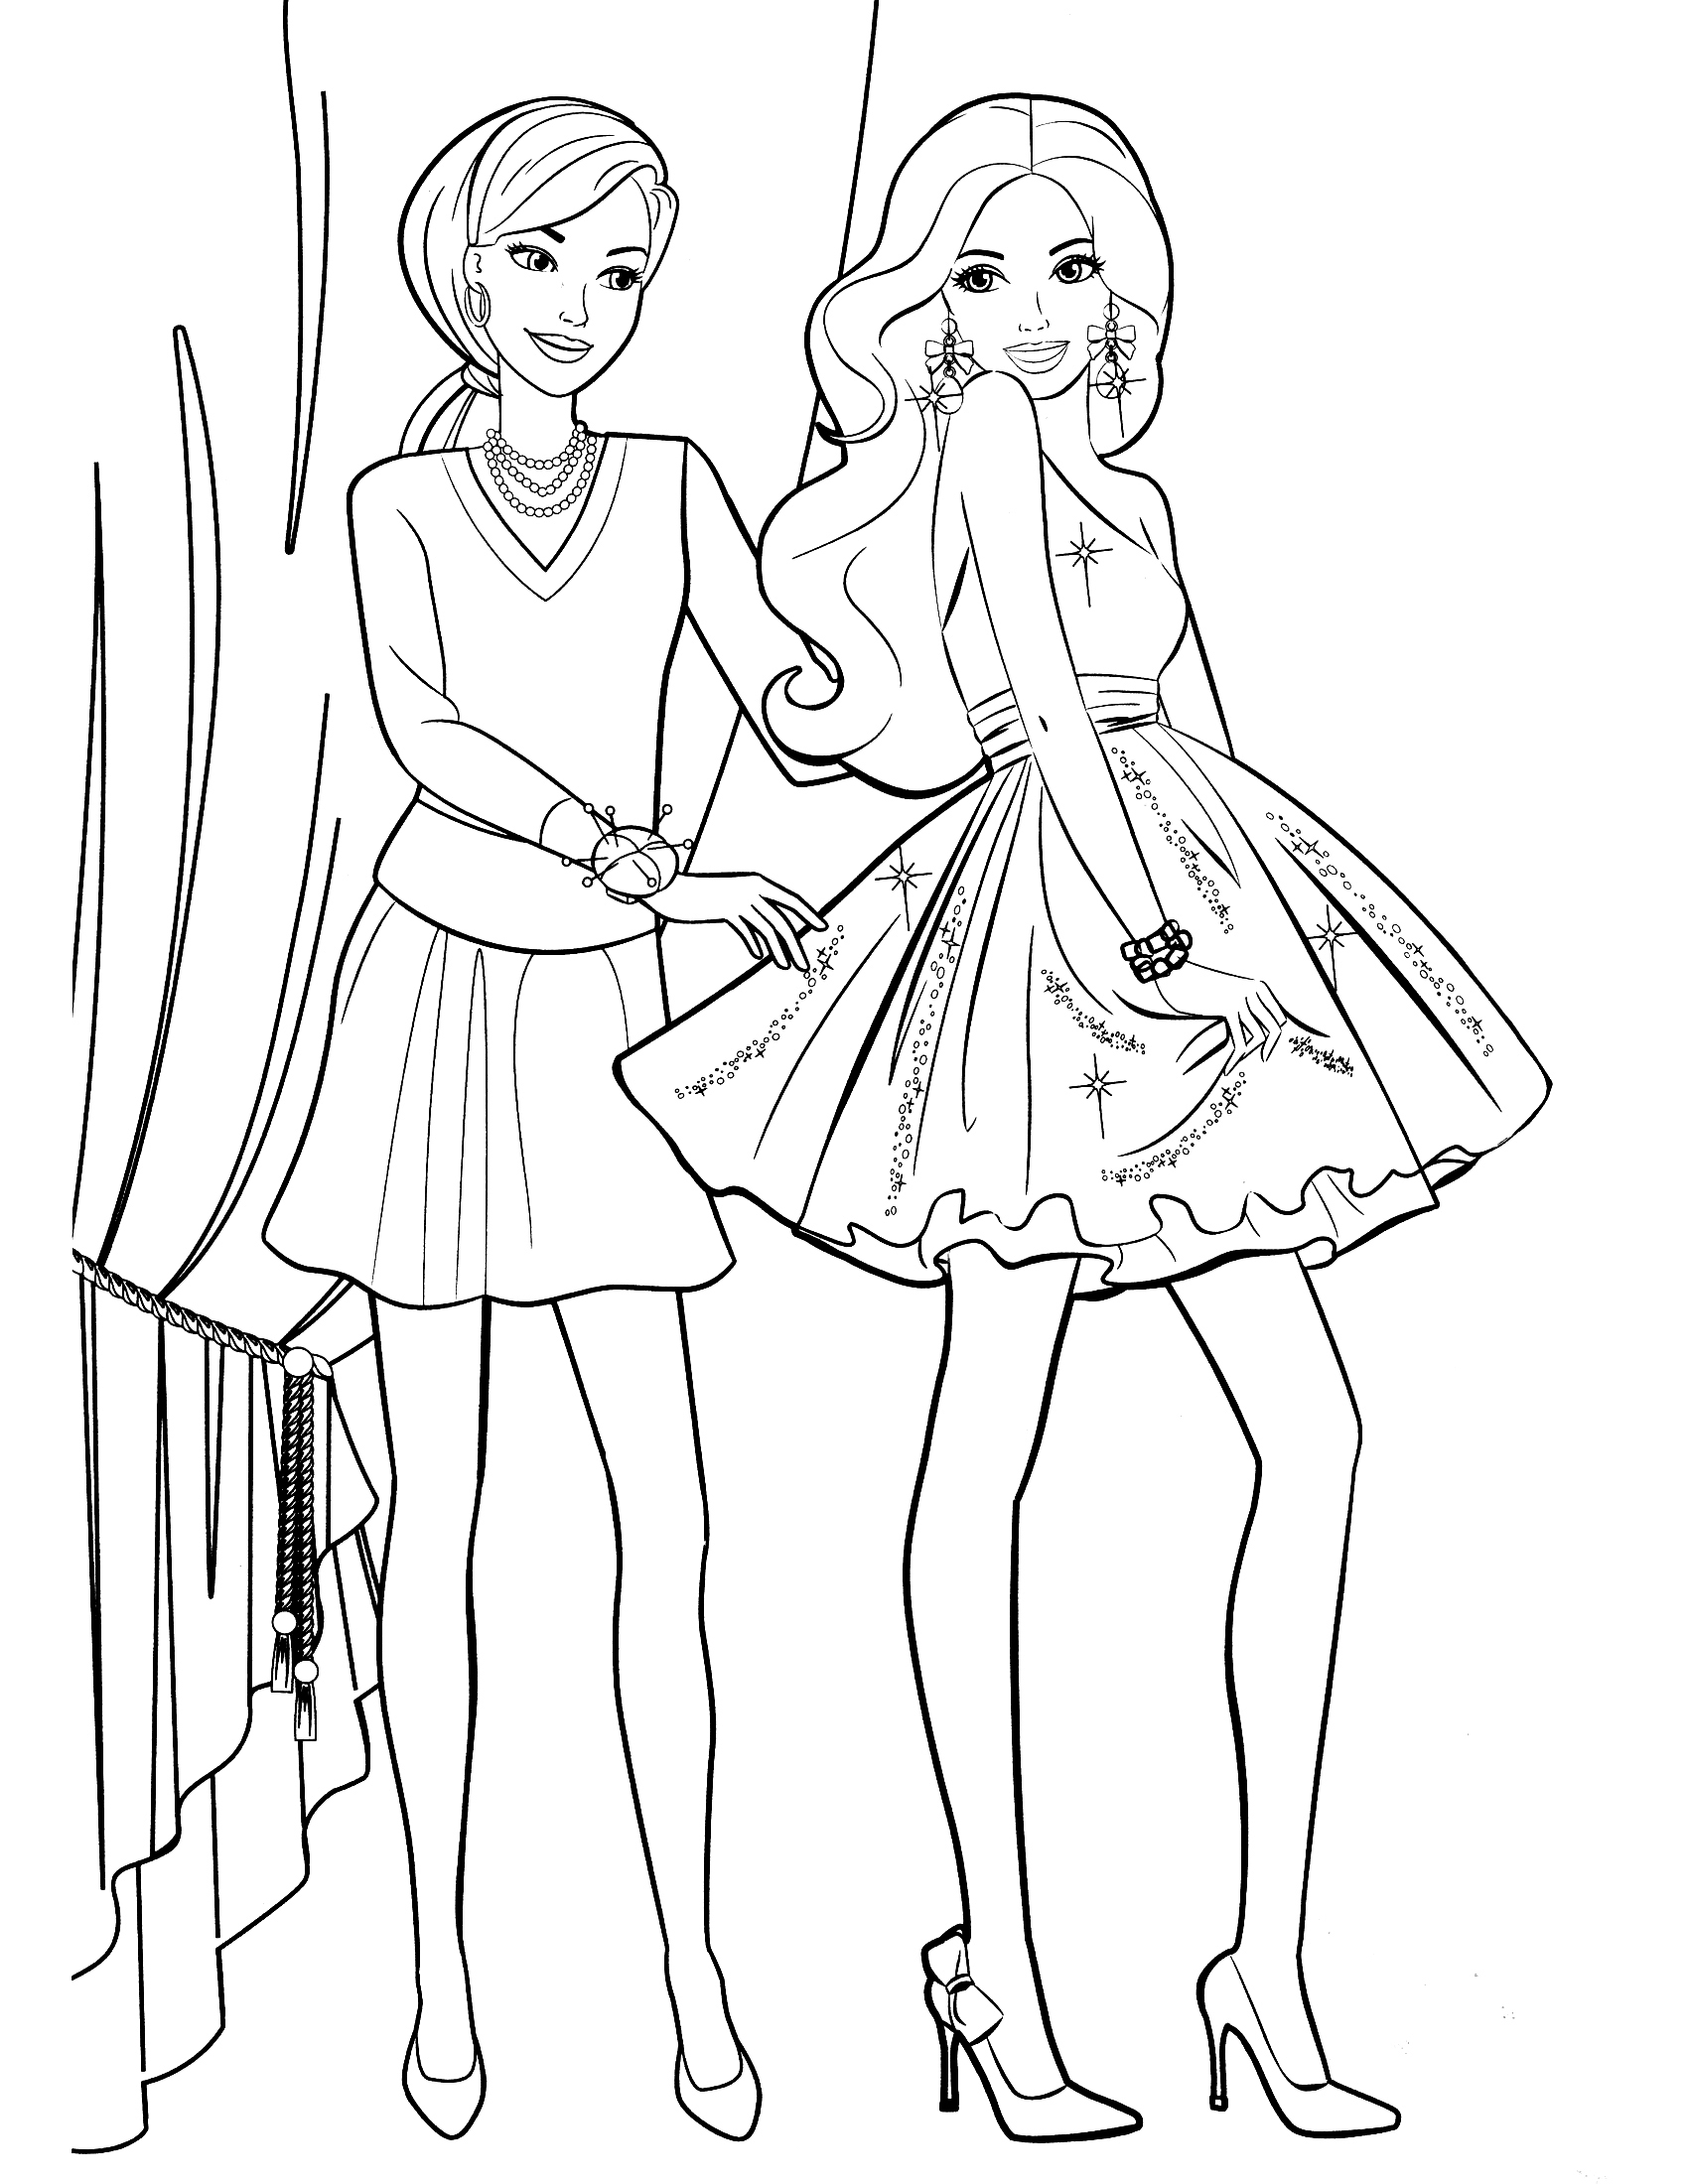 best friend coloring pages to print barbie with best friend coloring pages | color pages to print